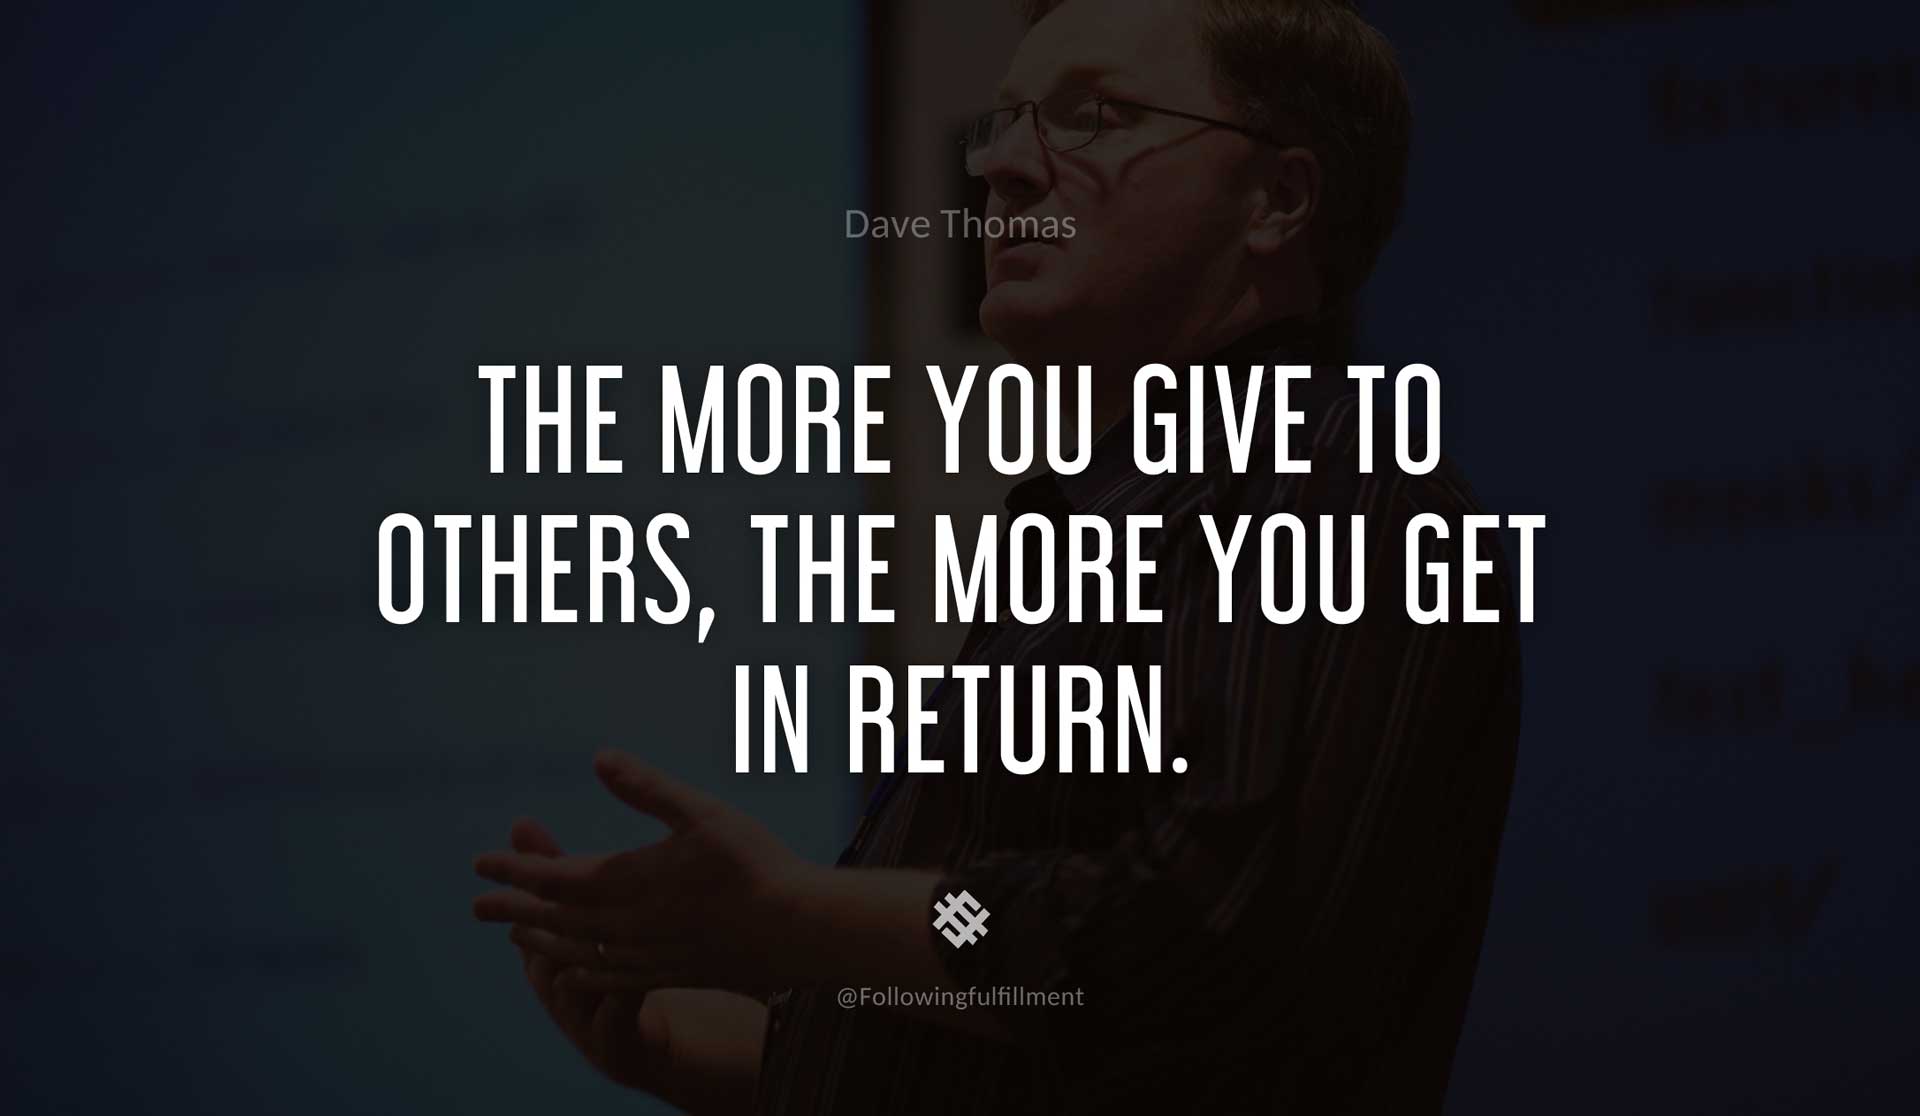 The-more-you-give-to-others,-the-more-you-get-in-return.-DAVE-THOMAS-Quote.jpg